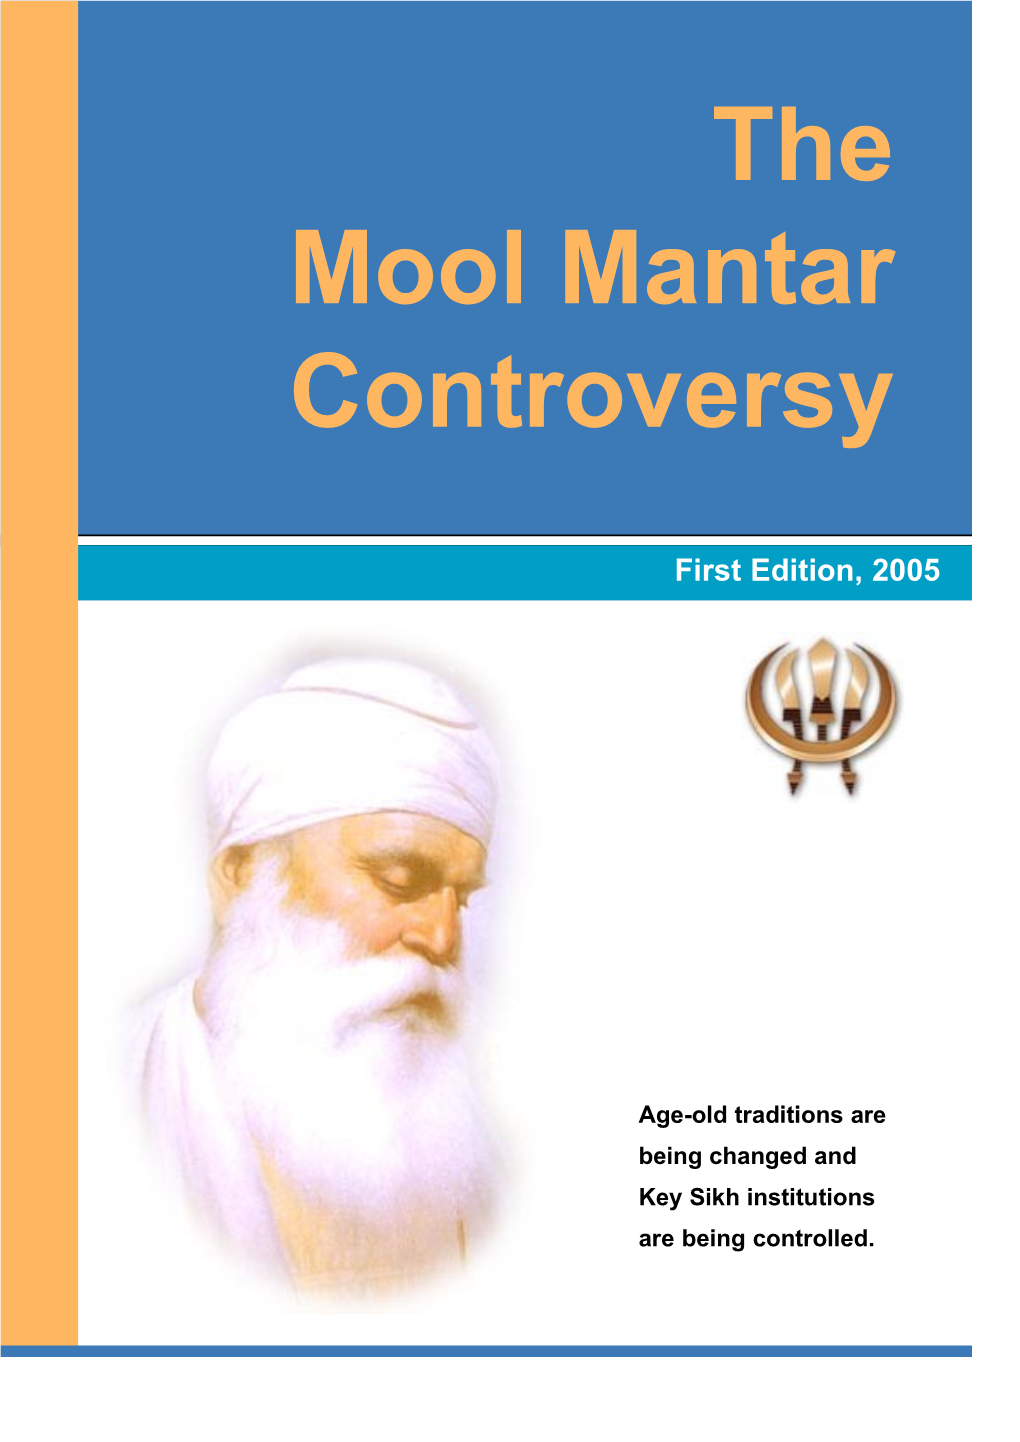 The Mool Mantar Controversy the Mool Mantar Controversy